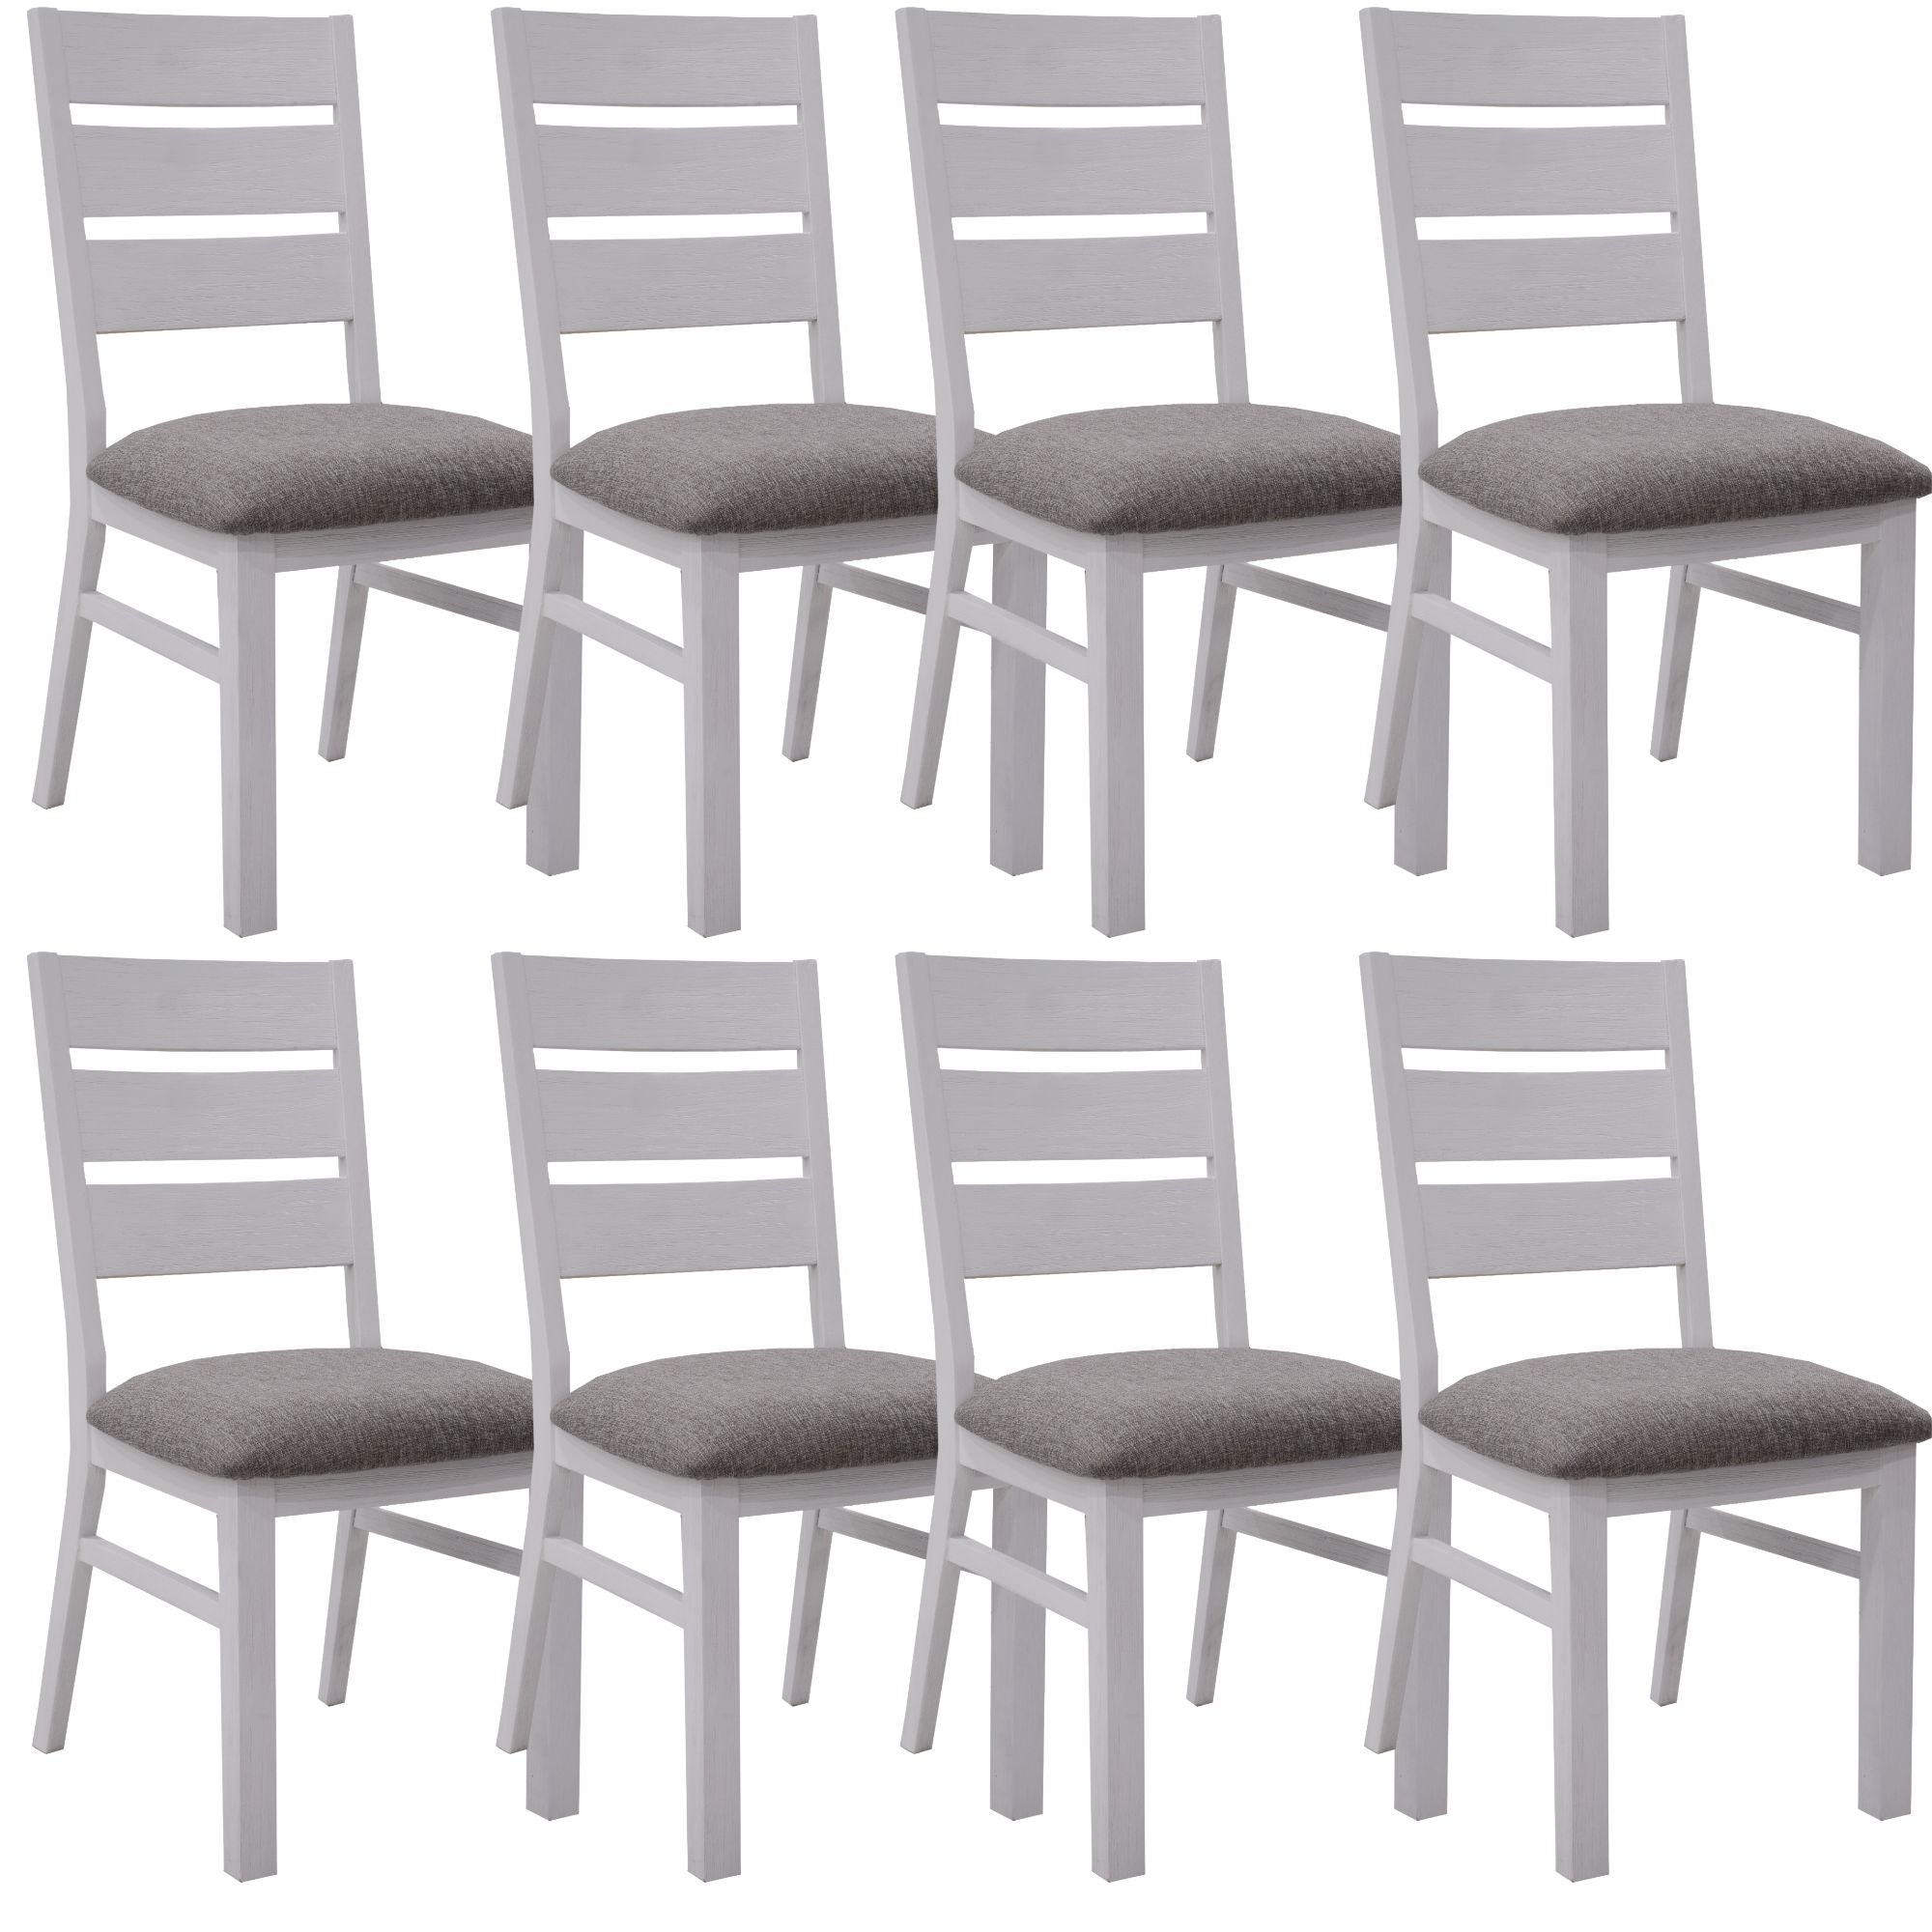 plumeria-dining-chair-set-of-8-solid-acacia-wood-dining-furniture-white-brush